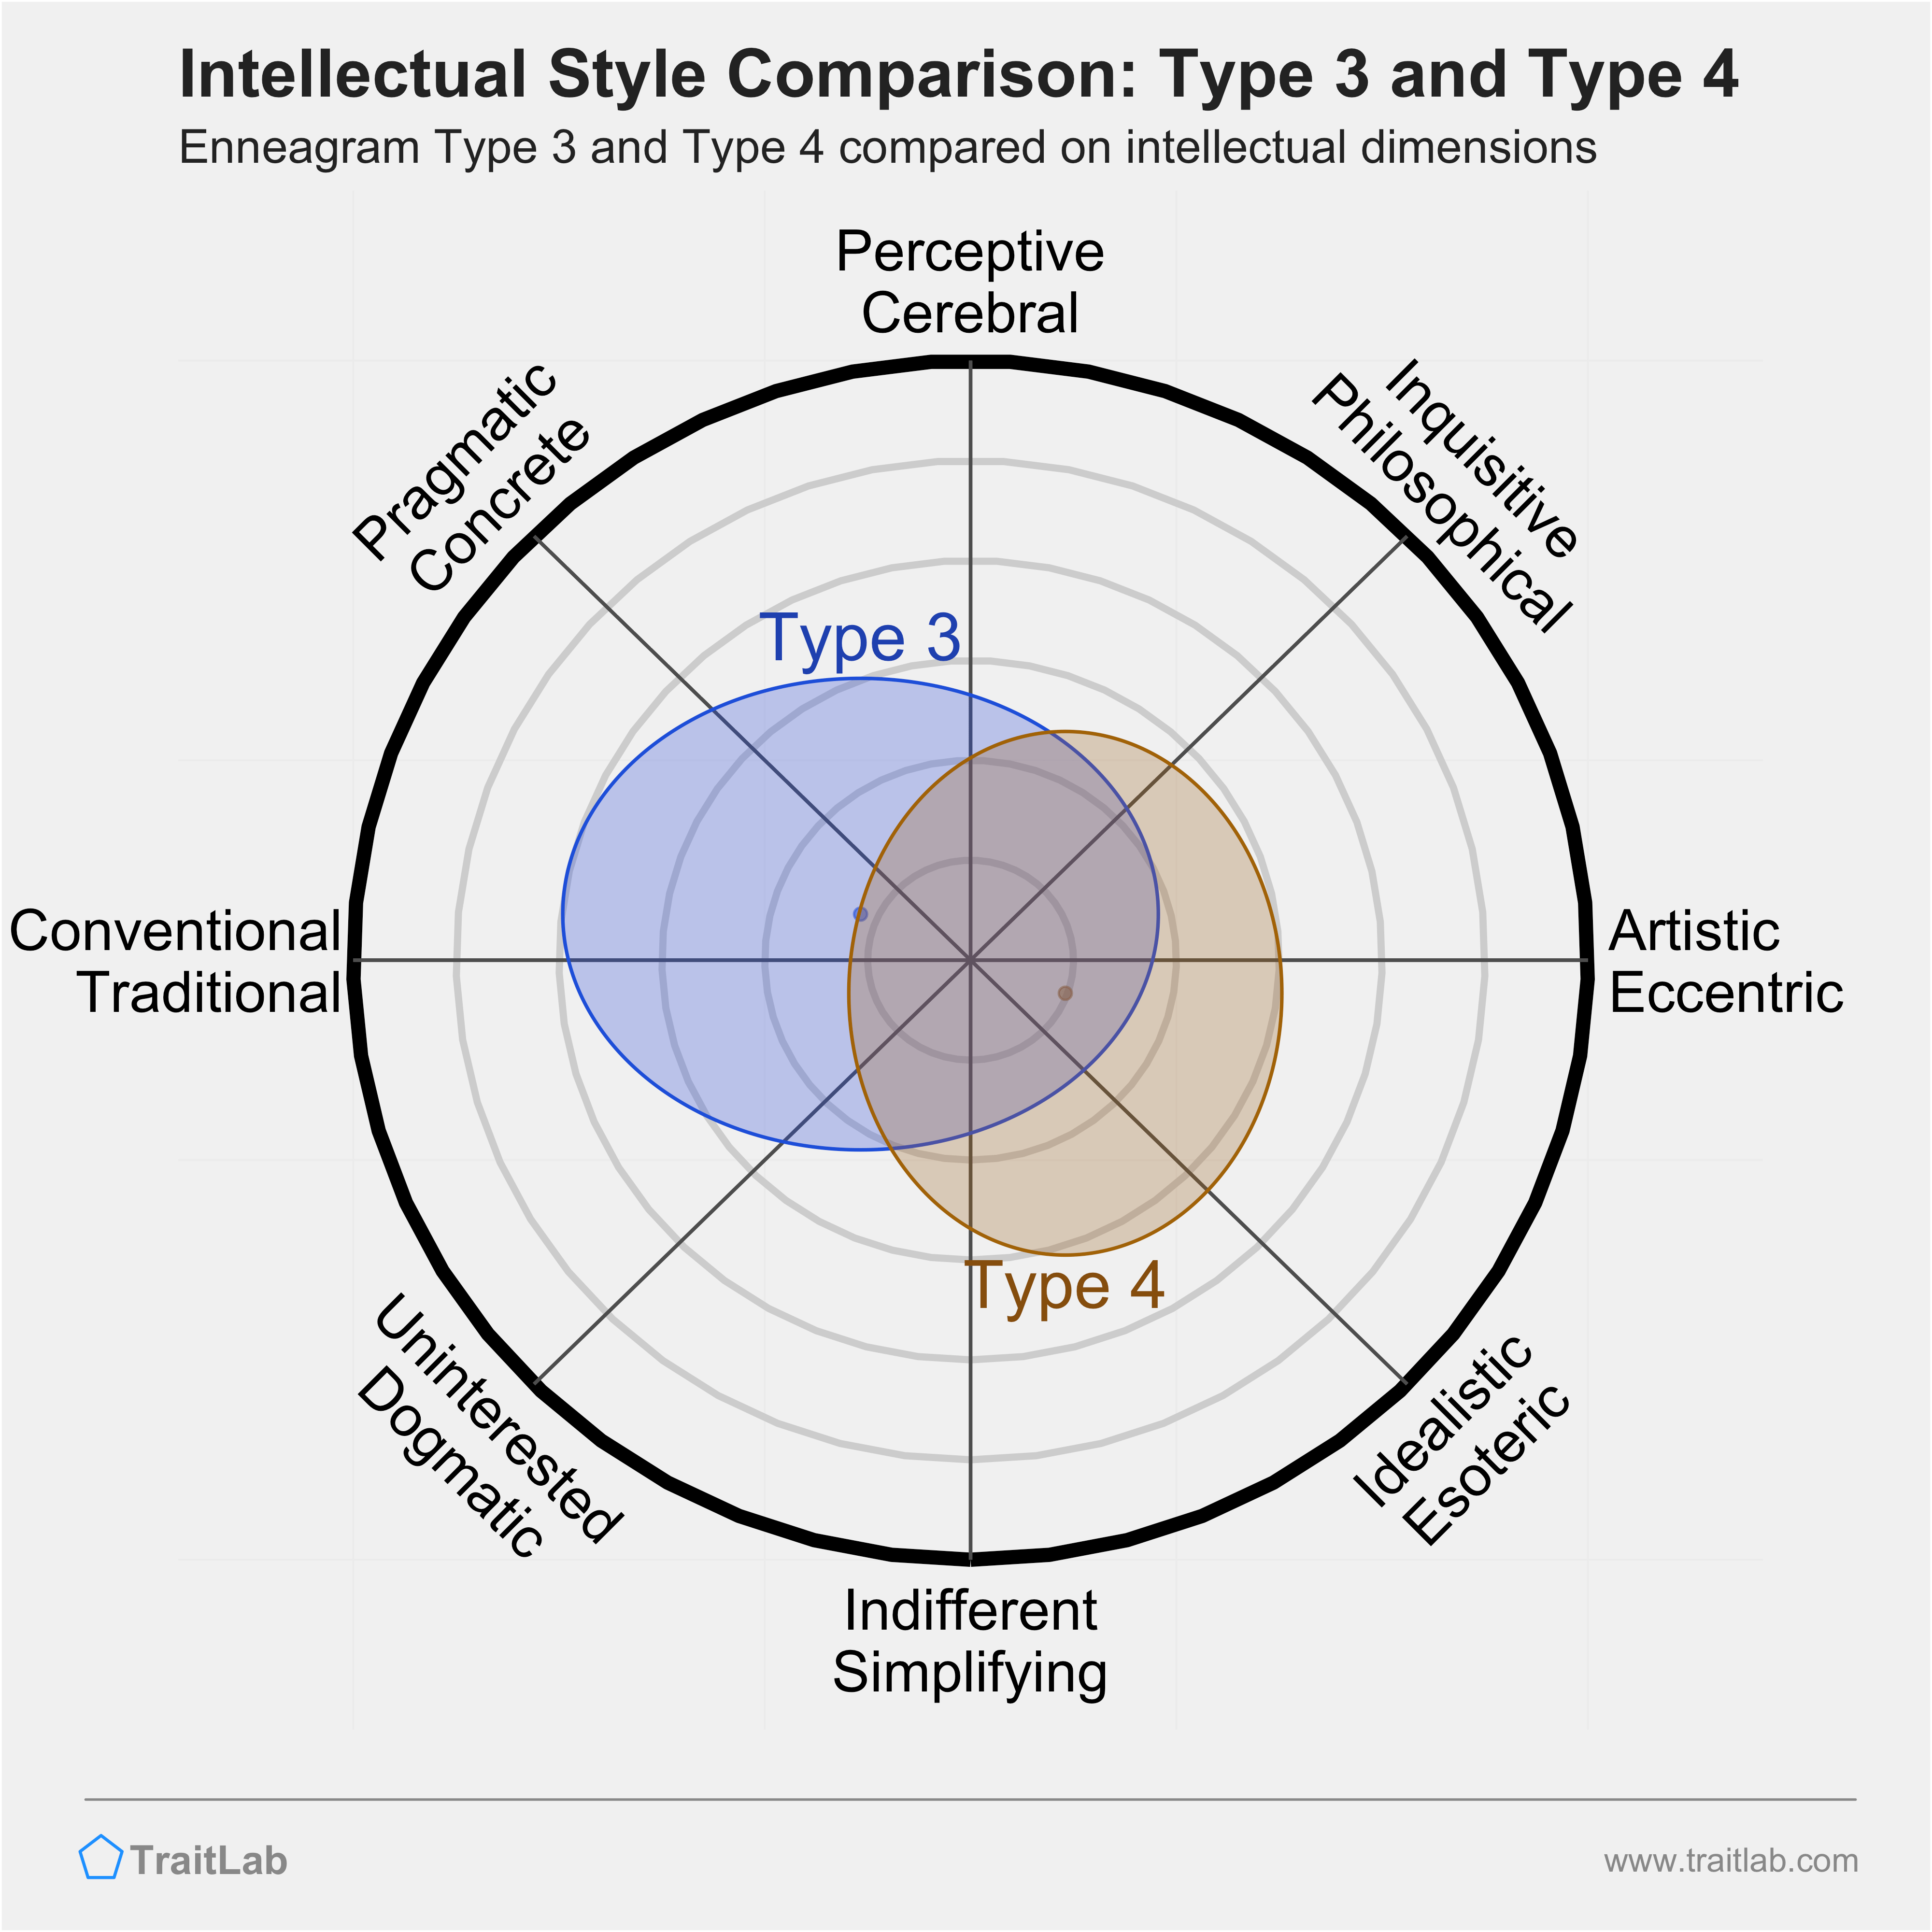 Type 3 and Type 4 comparison across intellectual dimensions